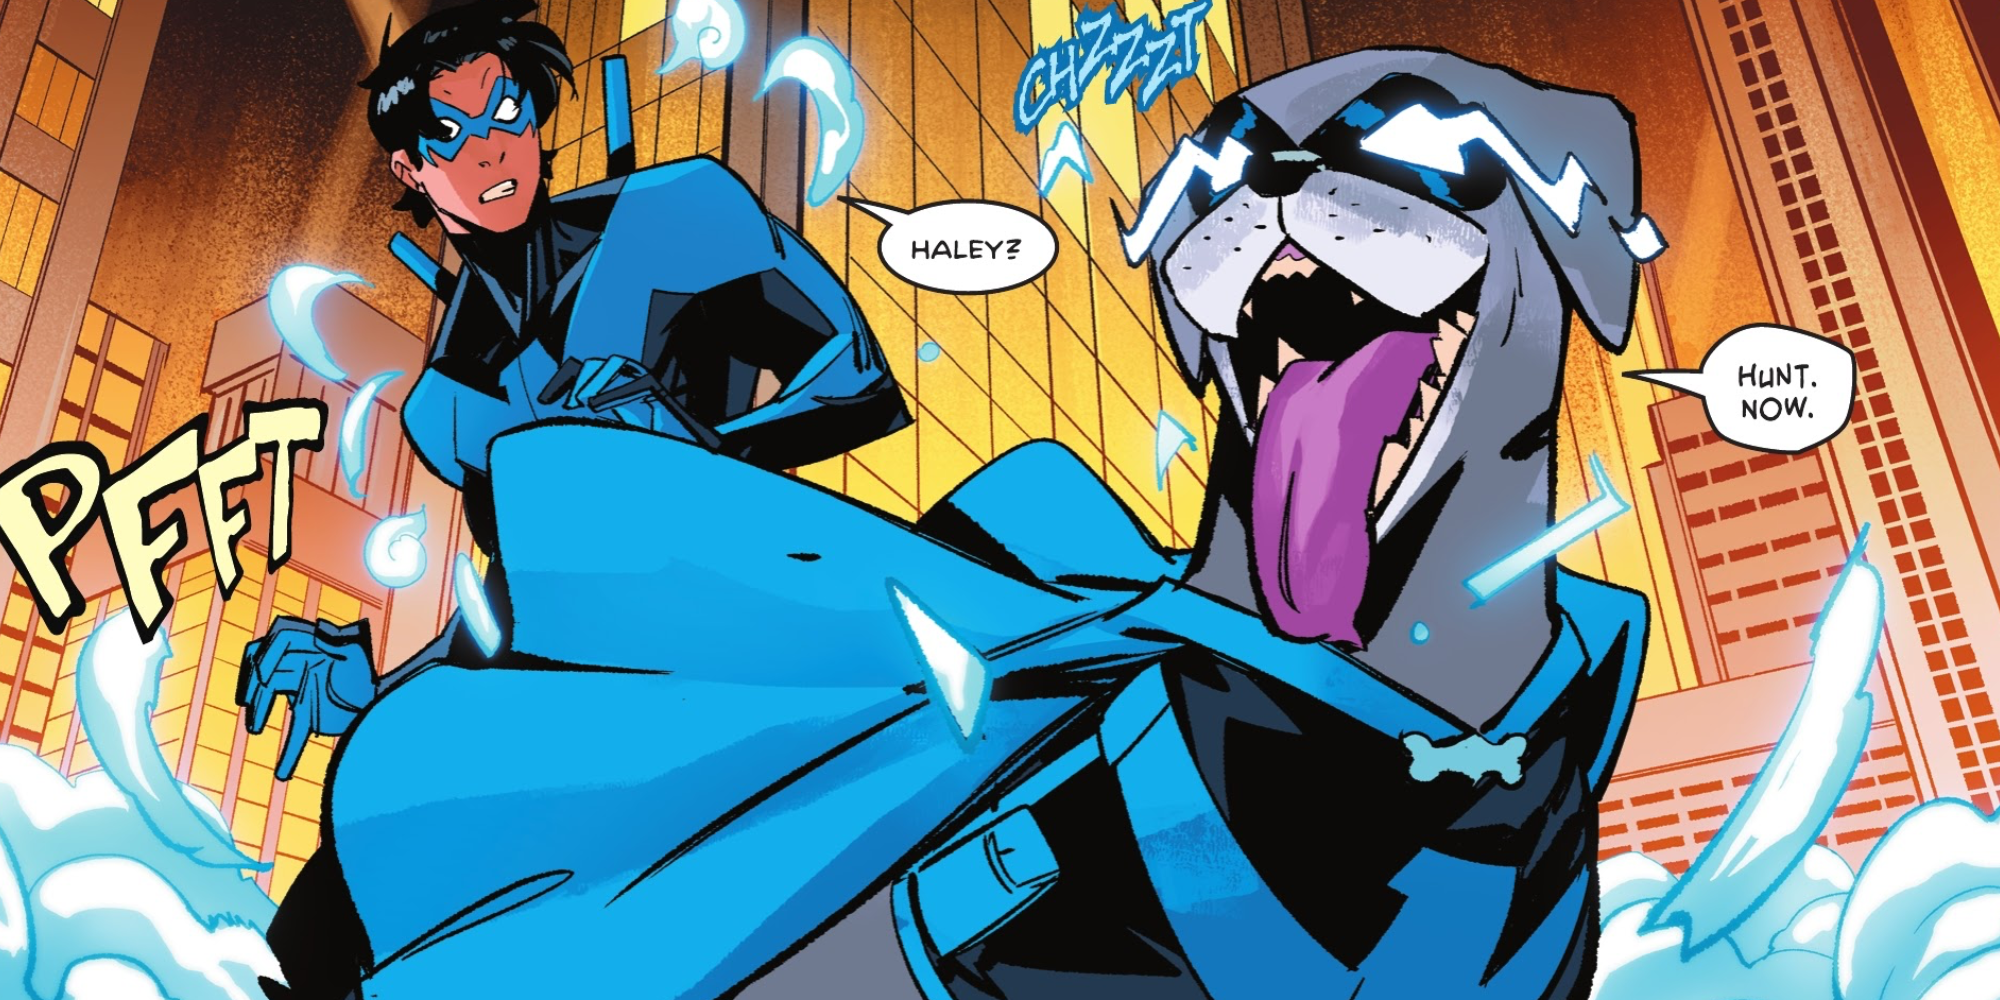 Nightwing's dog becomes official Superpet